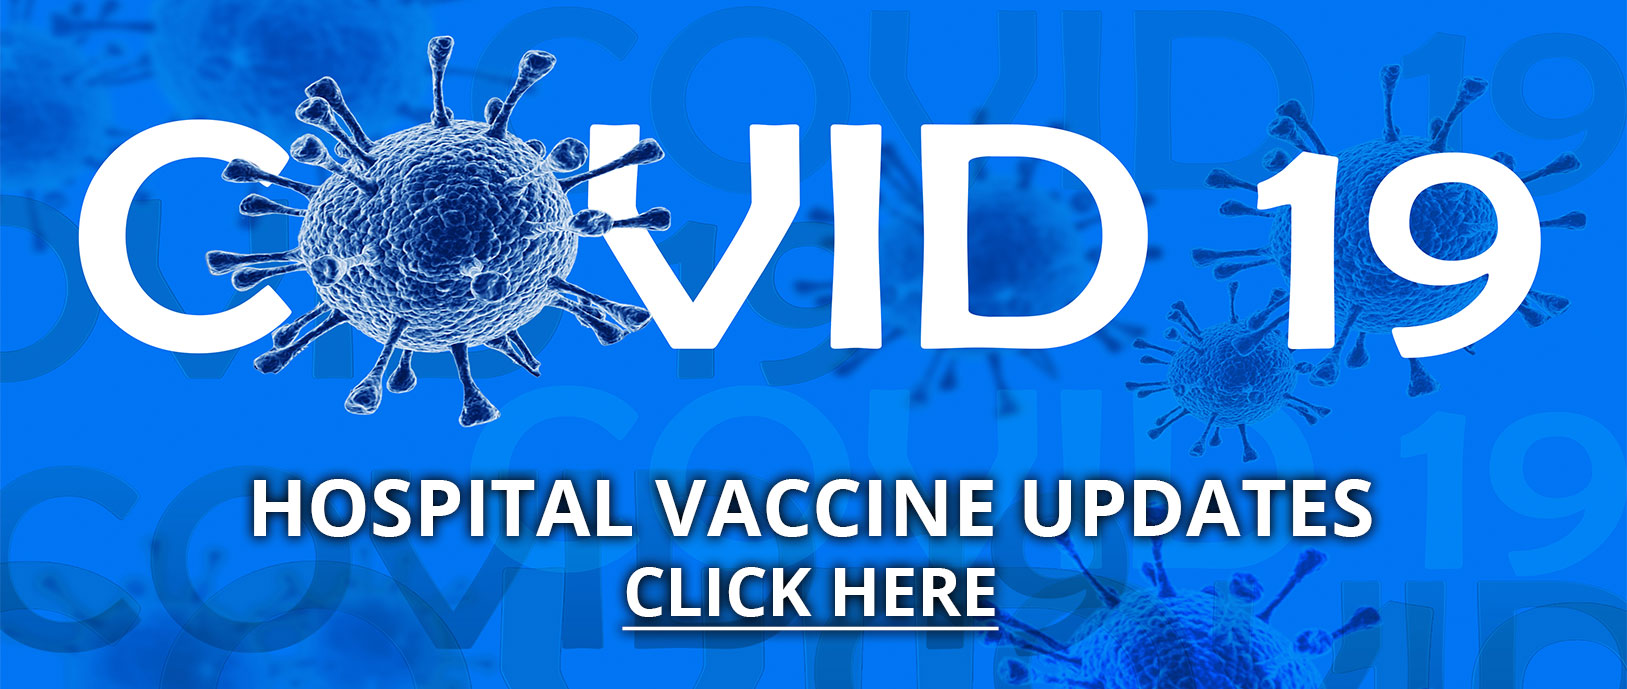 Banner graphic picture of the Corona Virus. Banner says:

HOSPITAL VACCINE UPDATES
CLICK HERE

COVID-19 Vaccine Registration